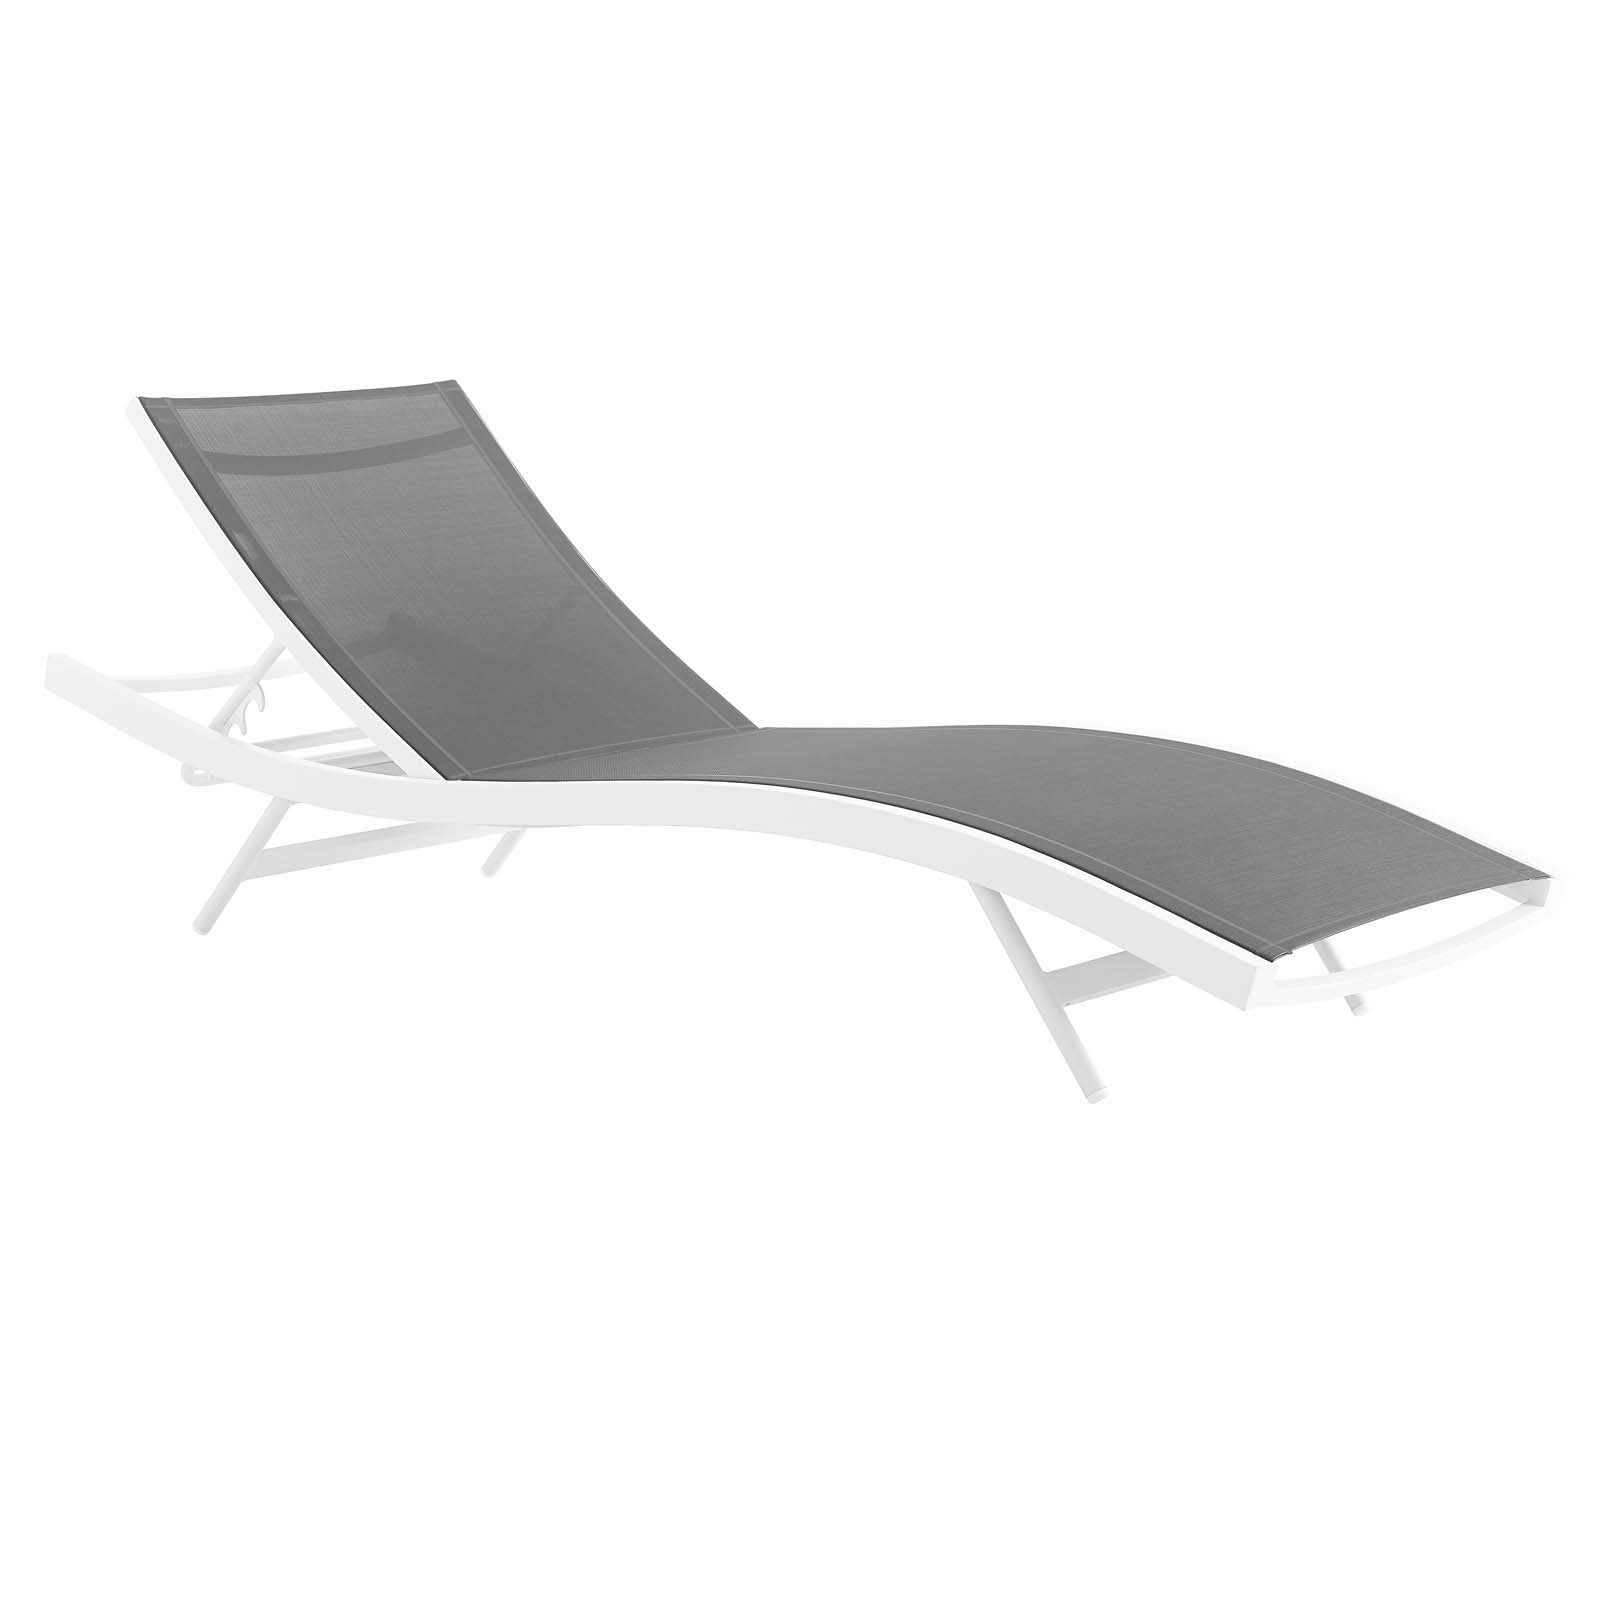 Modway Loungers - Glimpse Outdoor Patio Mesh Chaise Lounge Set of 4 White Gray